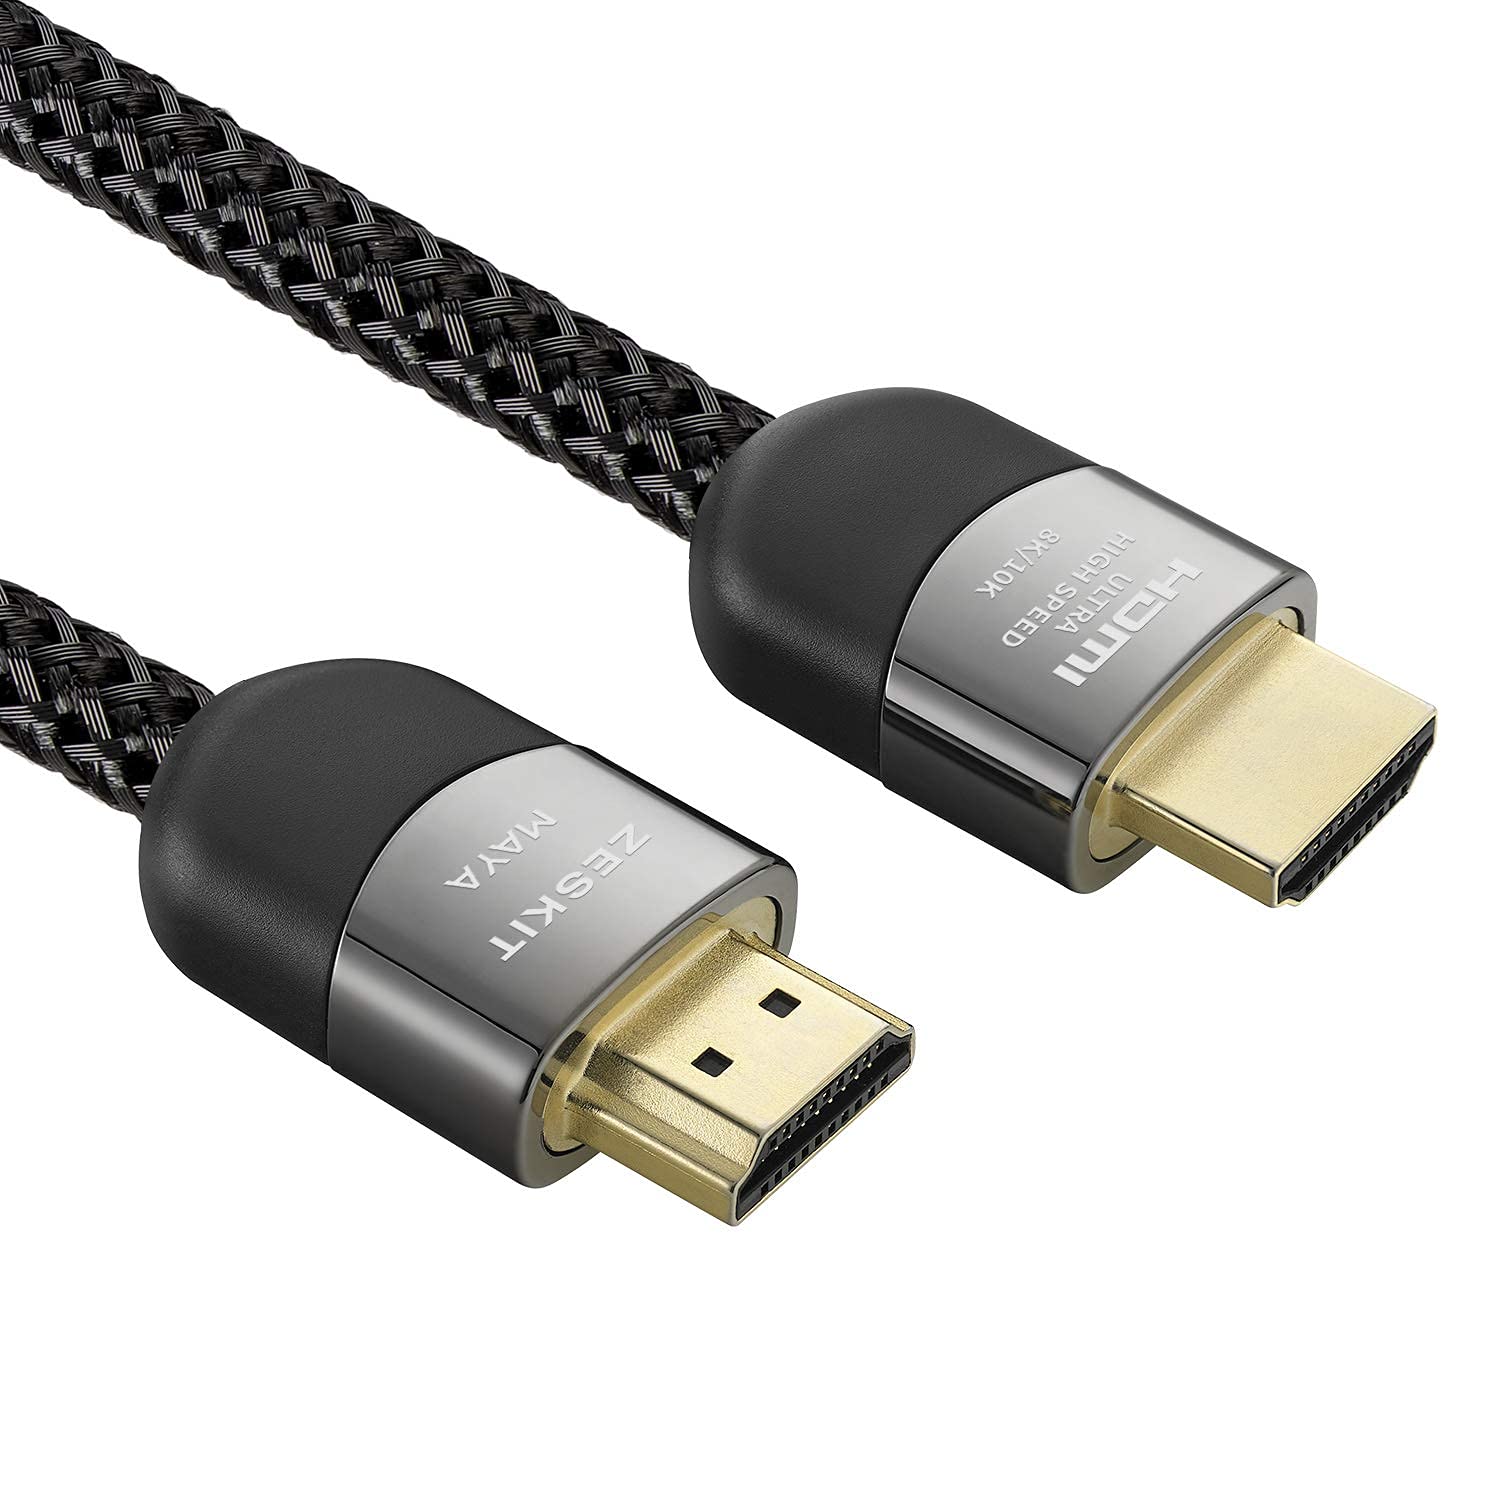 Zeskit Maya 2.1 8K HDMI Cable 6.5ft 4K120Hz 48Gbps for eARC Soundbar Ethernet Gaming 144Hz Certified Ultra High Speed HDR VRR HDCP 2.2 2.3 Compatible with Dolby Vision Atmos Apple TV Xbox Series X PS5